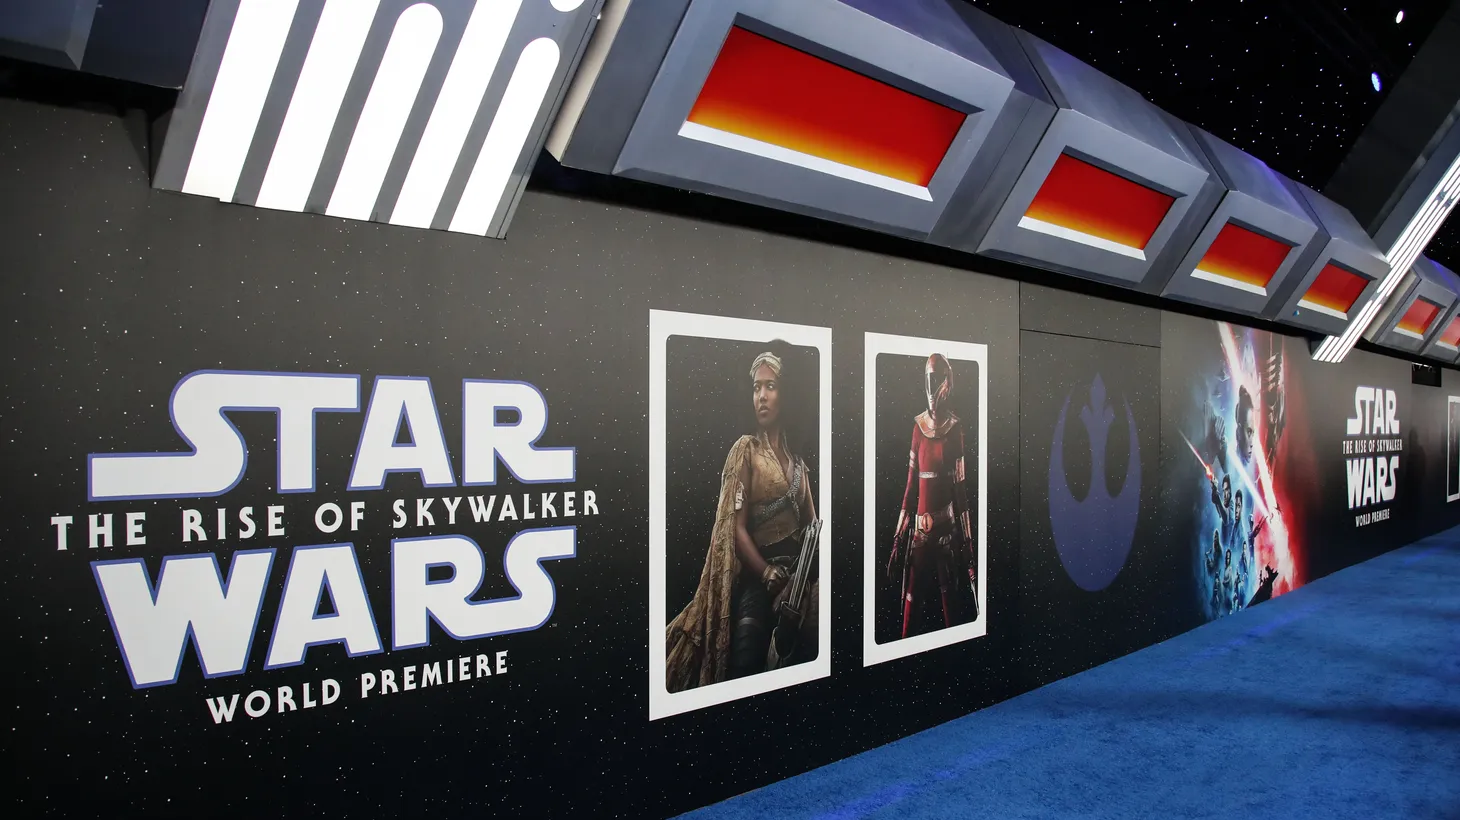 Lucasfilm “finished ‘The Rise of Skywalker’ in 2019 and there was essentially nowhere to go with these movies,” says Matt Belloni. The World Premiere of “Star Wars: The Rise Of Skywalker” held at the El Capitan Theatre in Hollywood, on December 16, 2019.